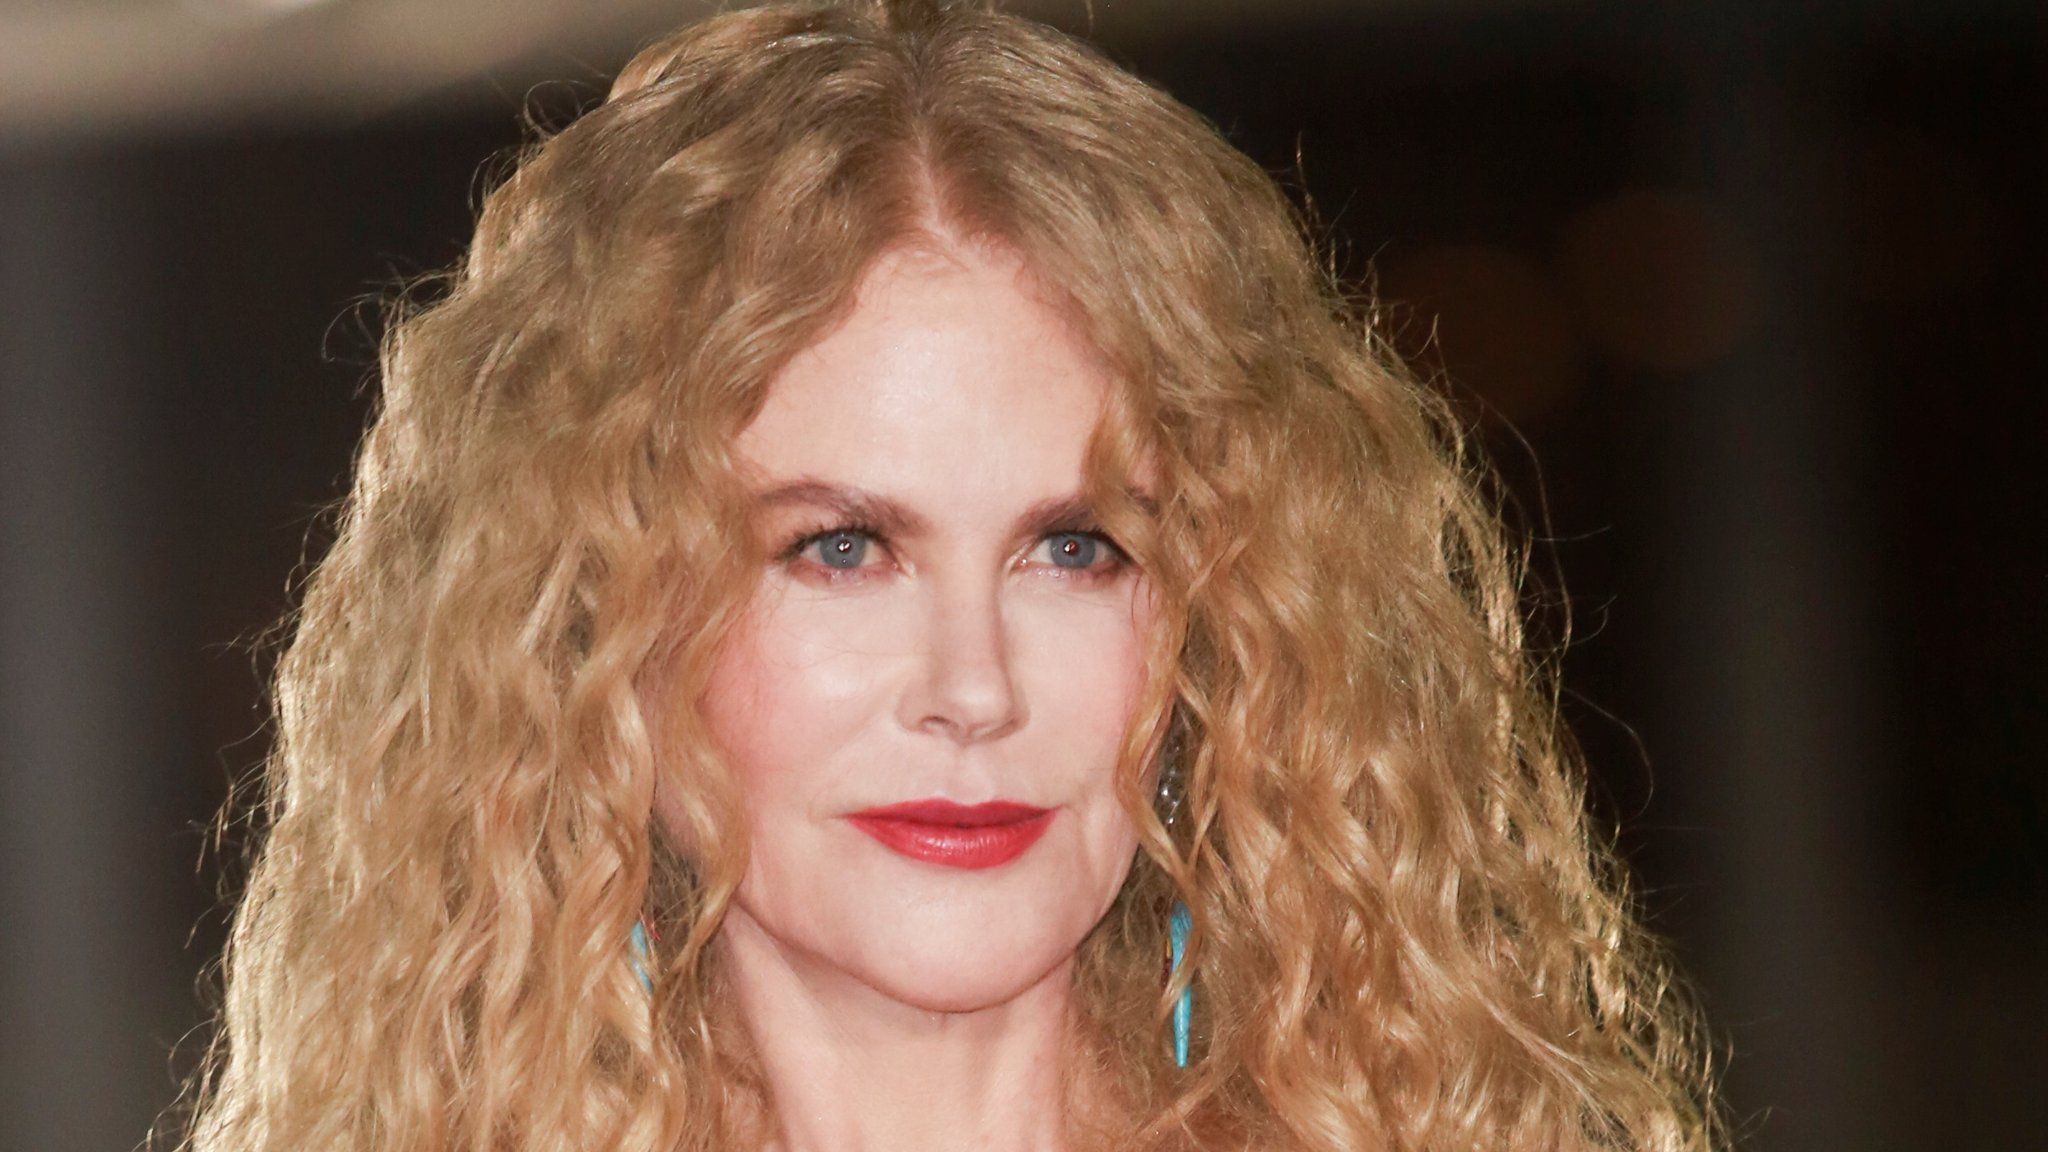 Nicole Kidman pictured at the Academy Museum of Motion Pictures gala in Los Angeles in September 2021